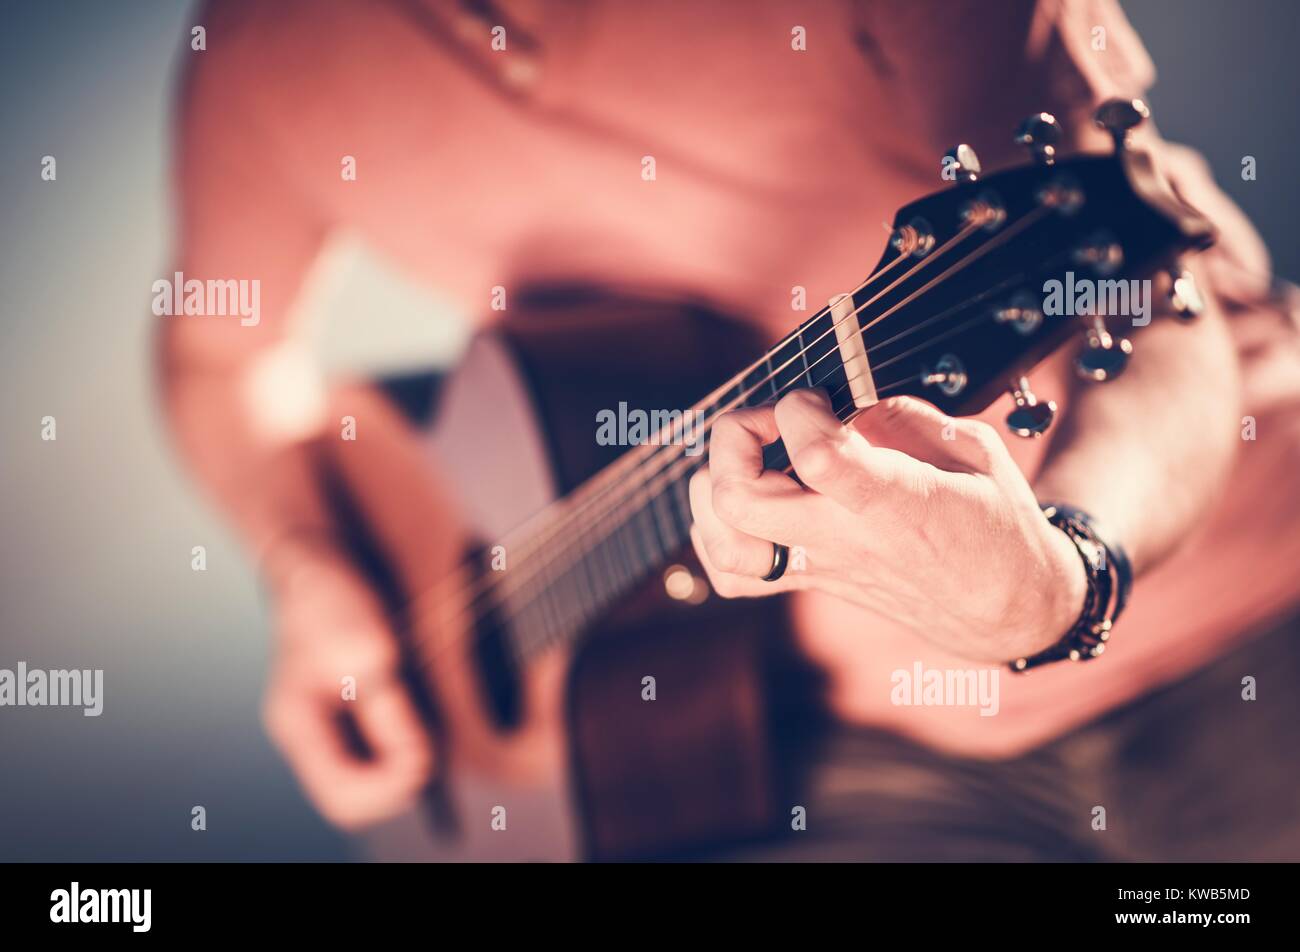 Caucasian Musician Playing Acoustic Guitar. Hand on Guitar Strings Closeup Photo. Music Performing. Stock Photo